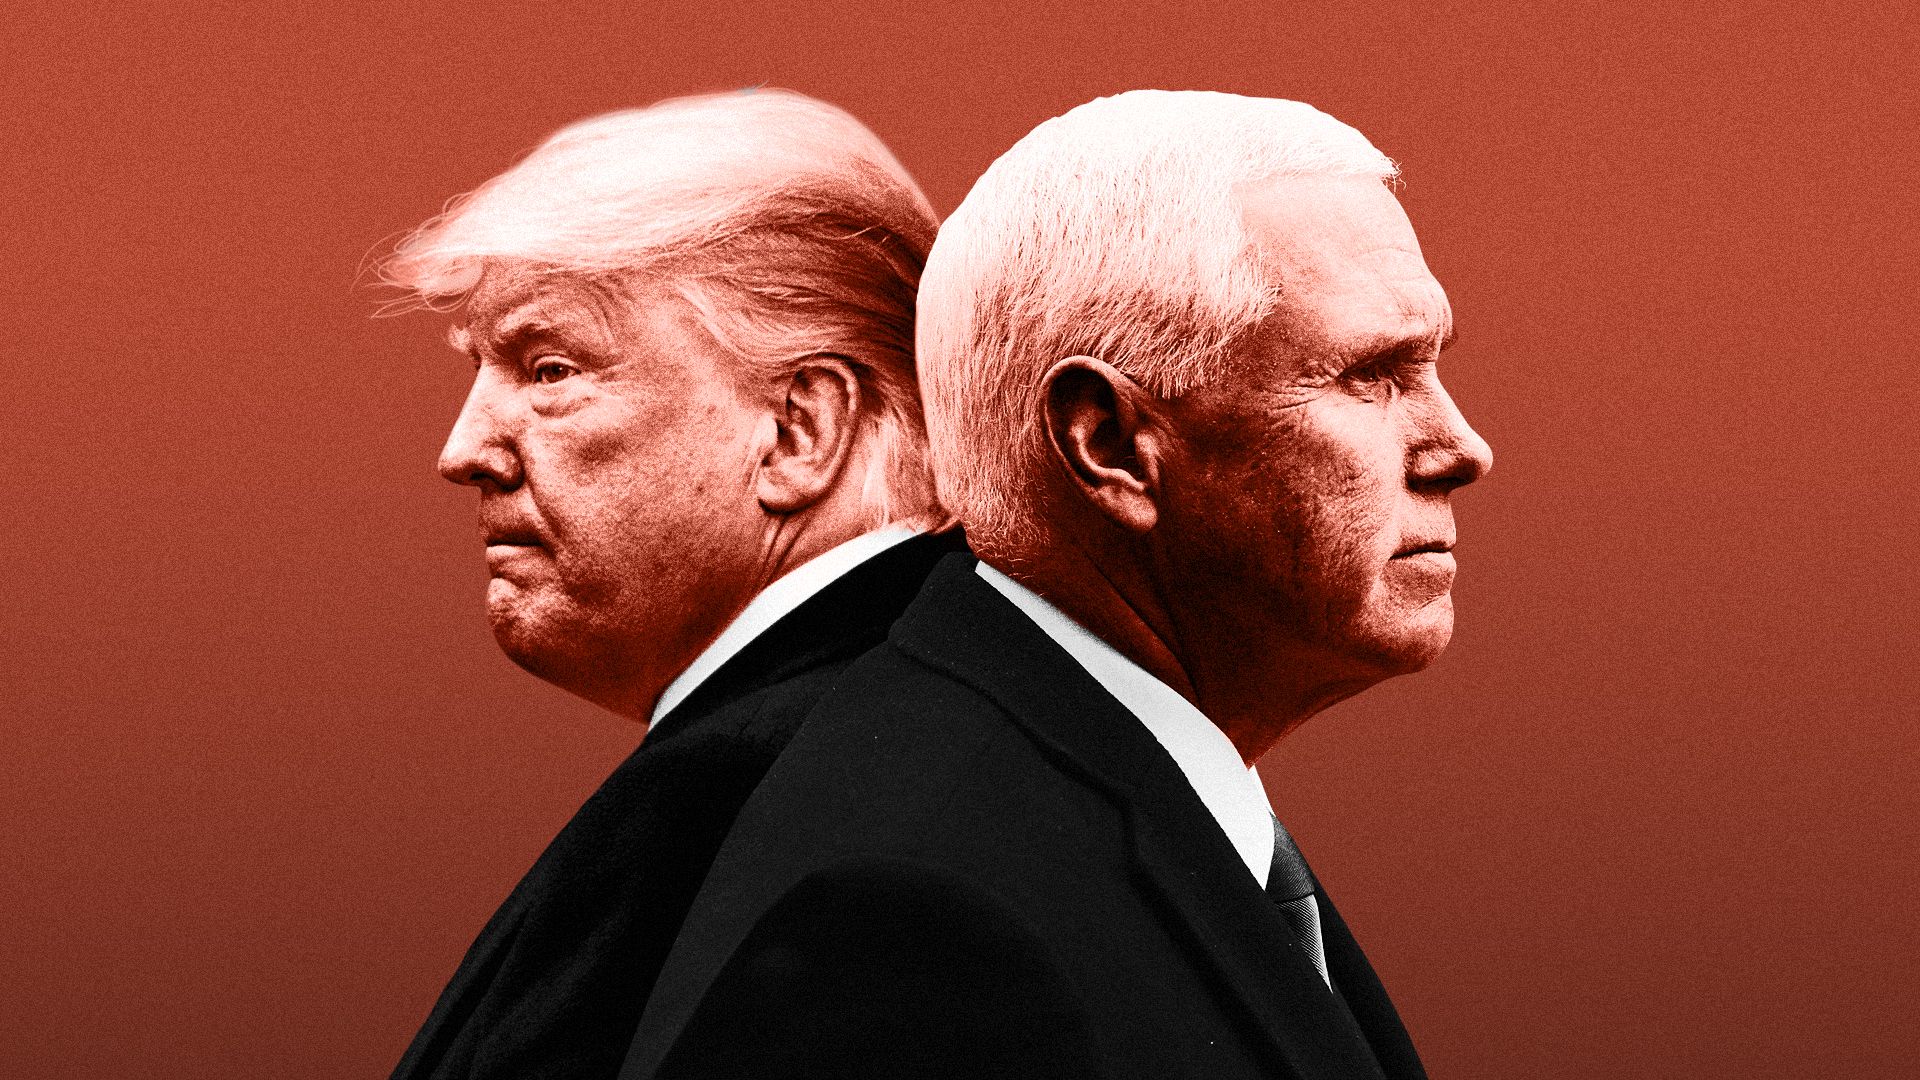 Illustration of Mike Pence and Donald Trump in profile facing away from each other.